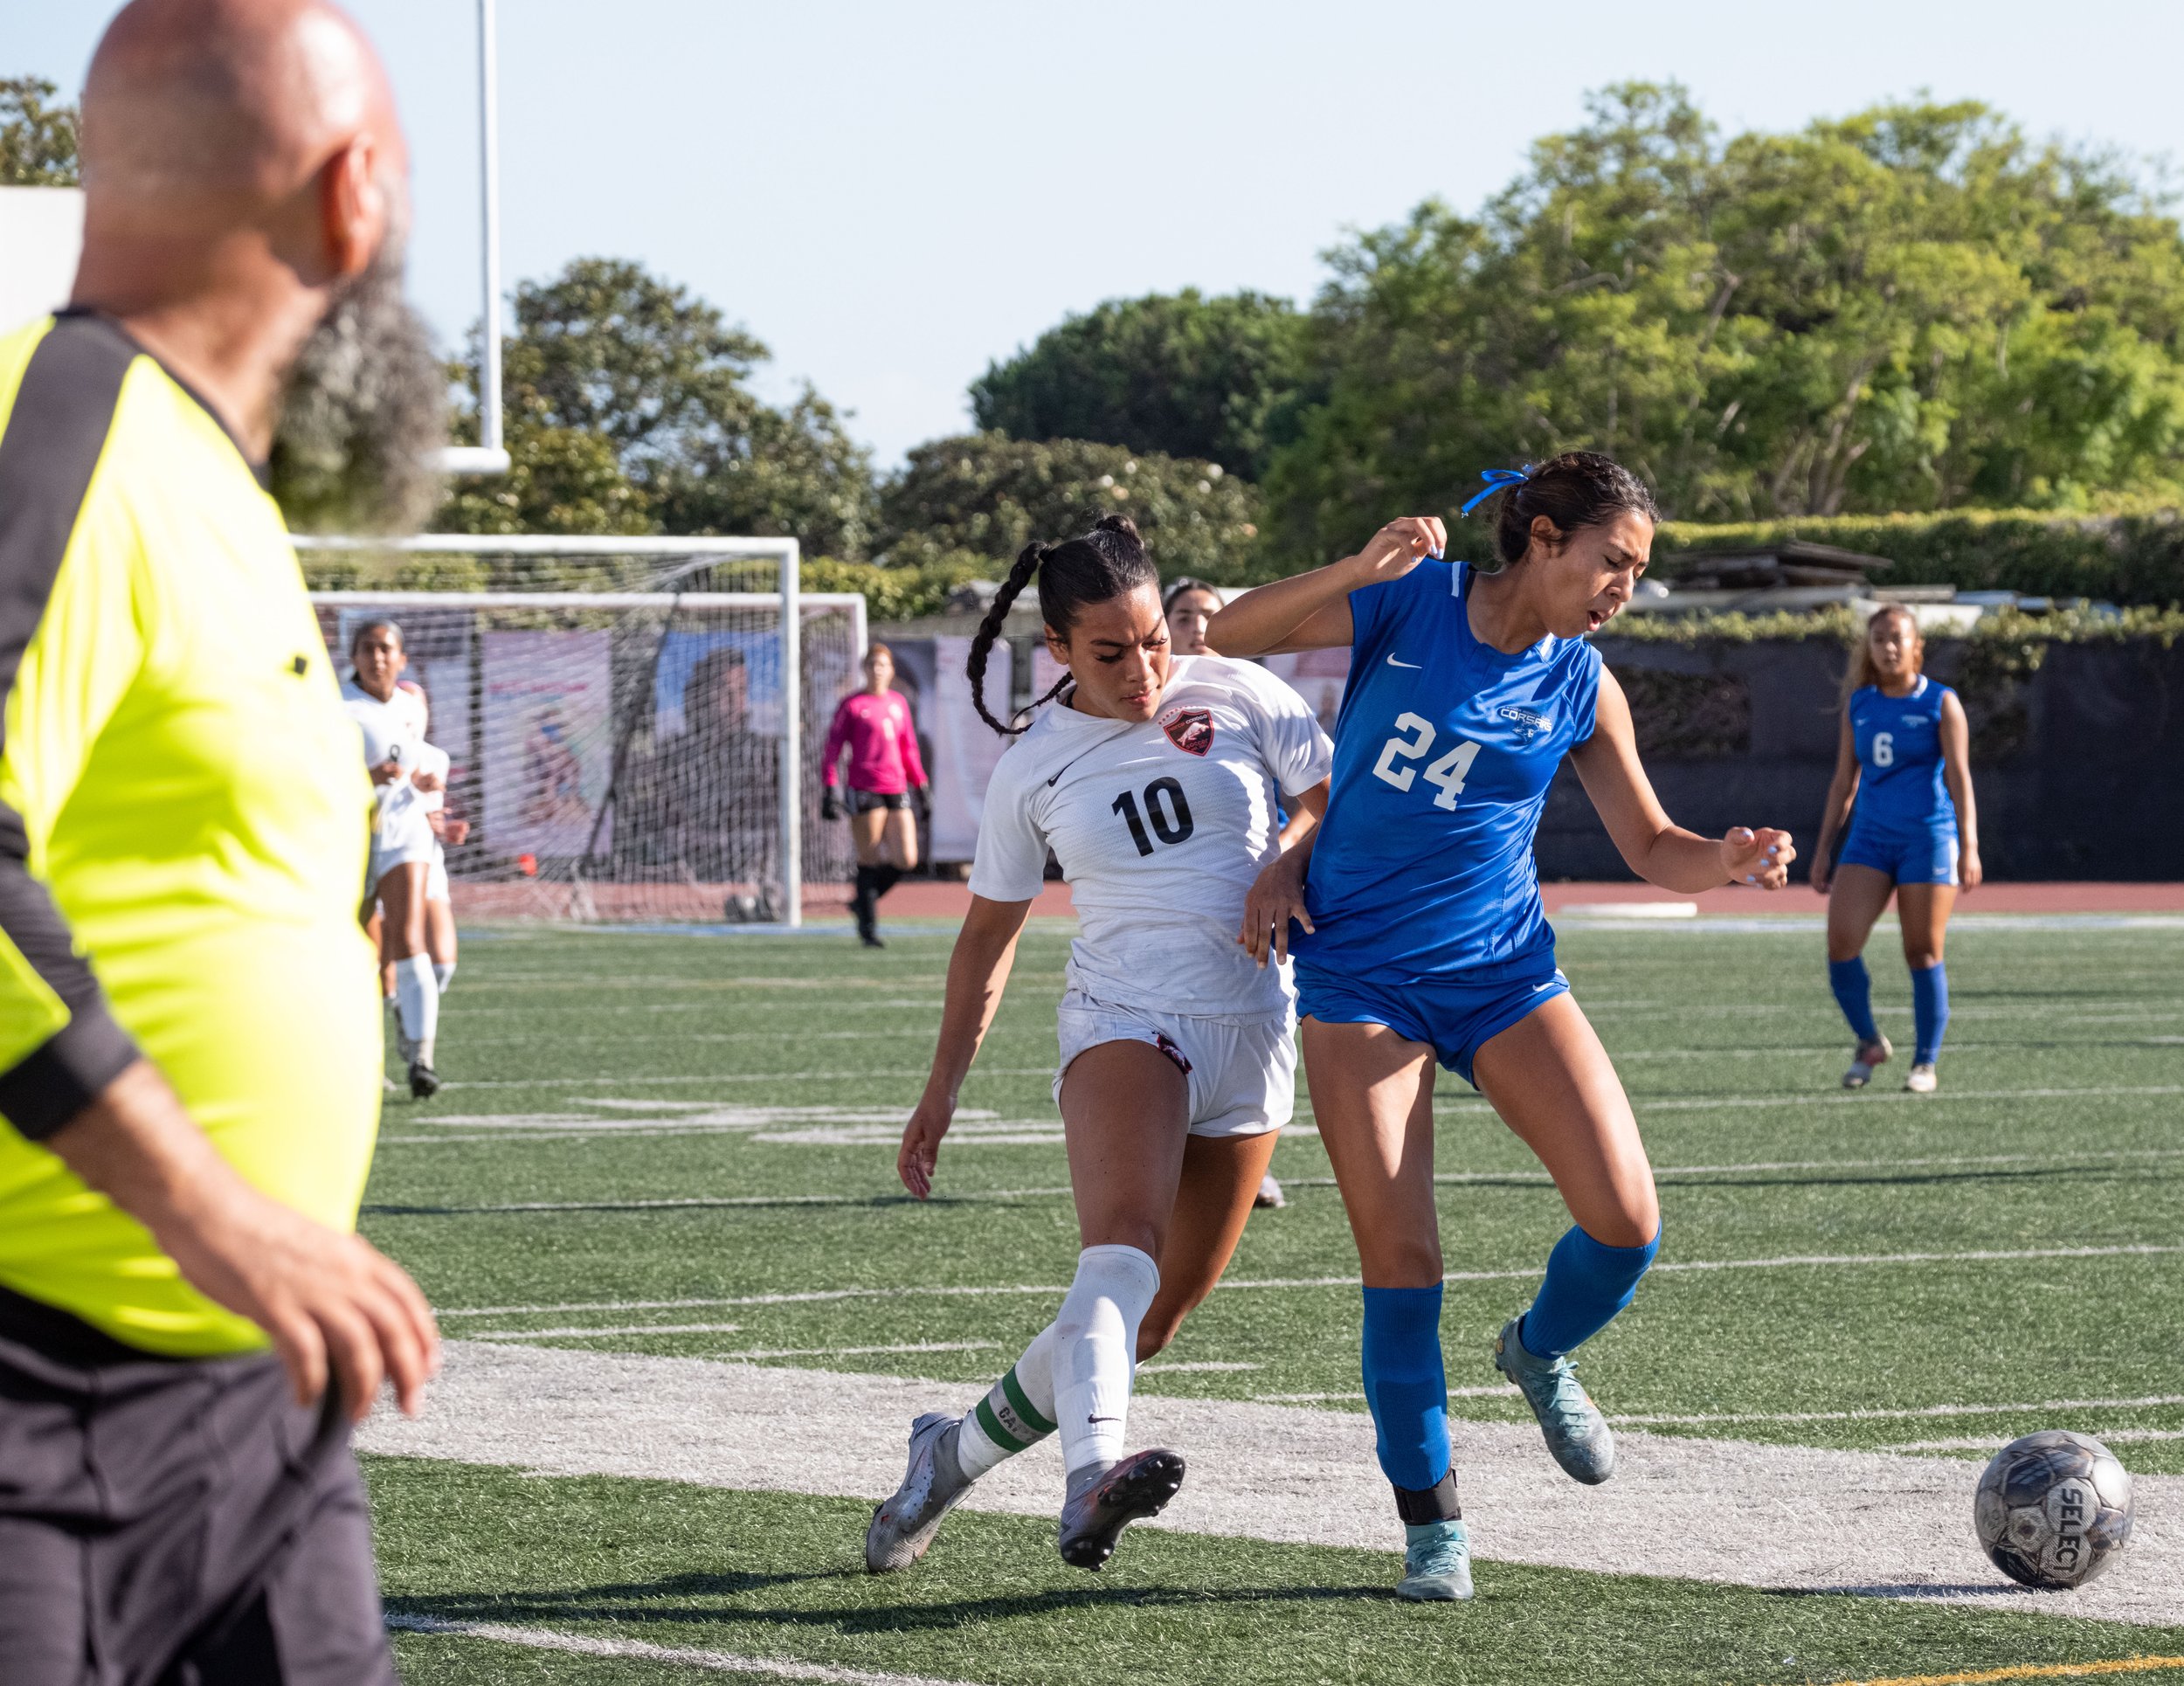  LA Pierce midfielder Victoria Castro(10) rying to get the ball away from Santa Monica College defender Mika Brenner during their match on Tue. Sept. 12 on Corsair Field at Santa Monica, Calif. (Danilo Perez | The Corsair) 